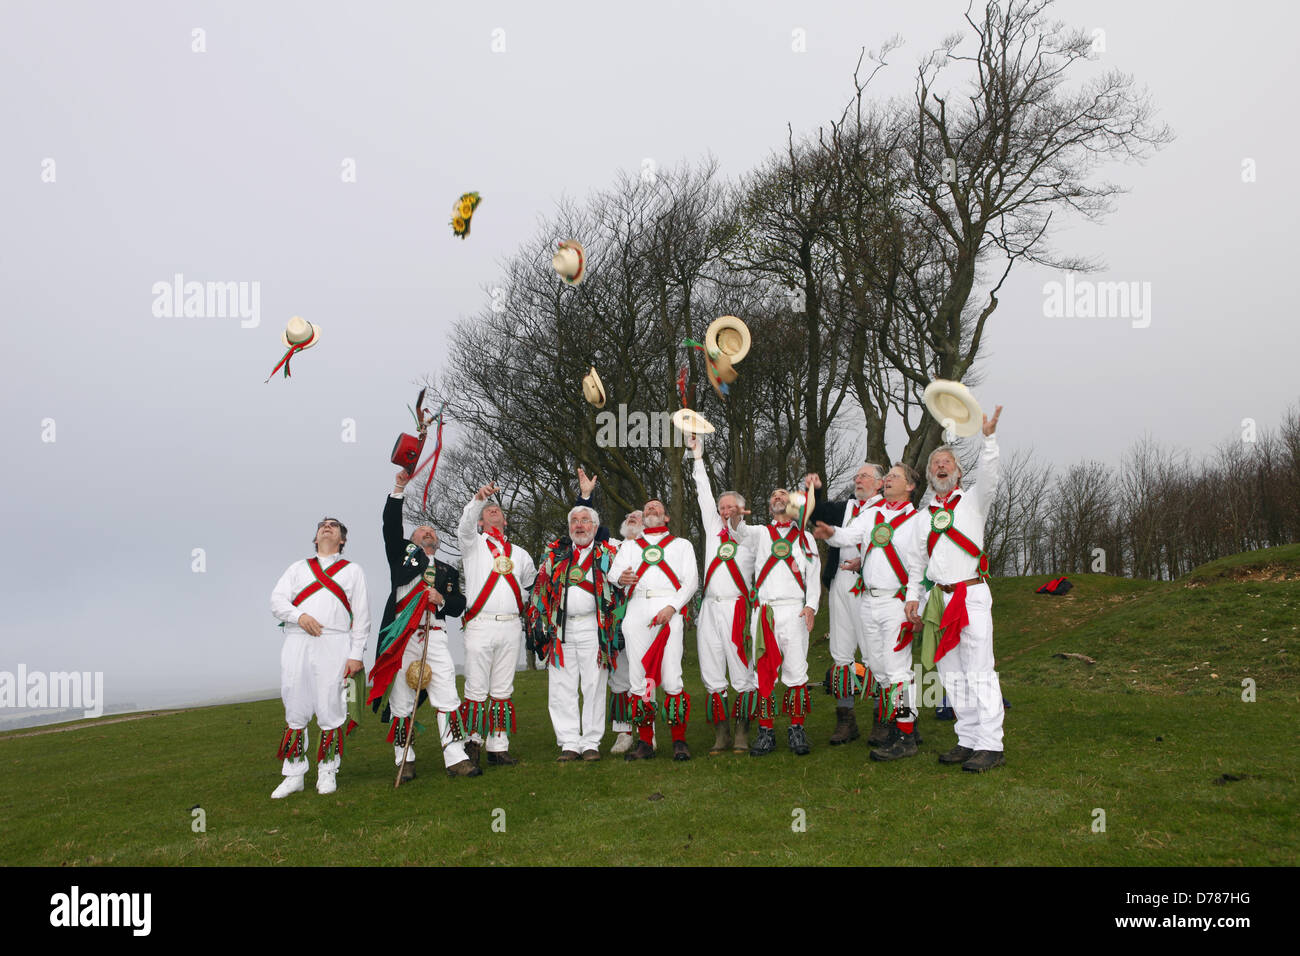 Chanctonbury Ring Morris Men celebrate May Day (1st May) with their traditional singing and dancing at Chanctonbury Ring, atop Chanctonbury Hill, East Sussex. Stock Photo